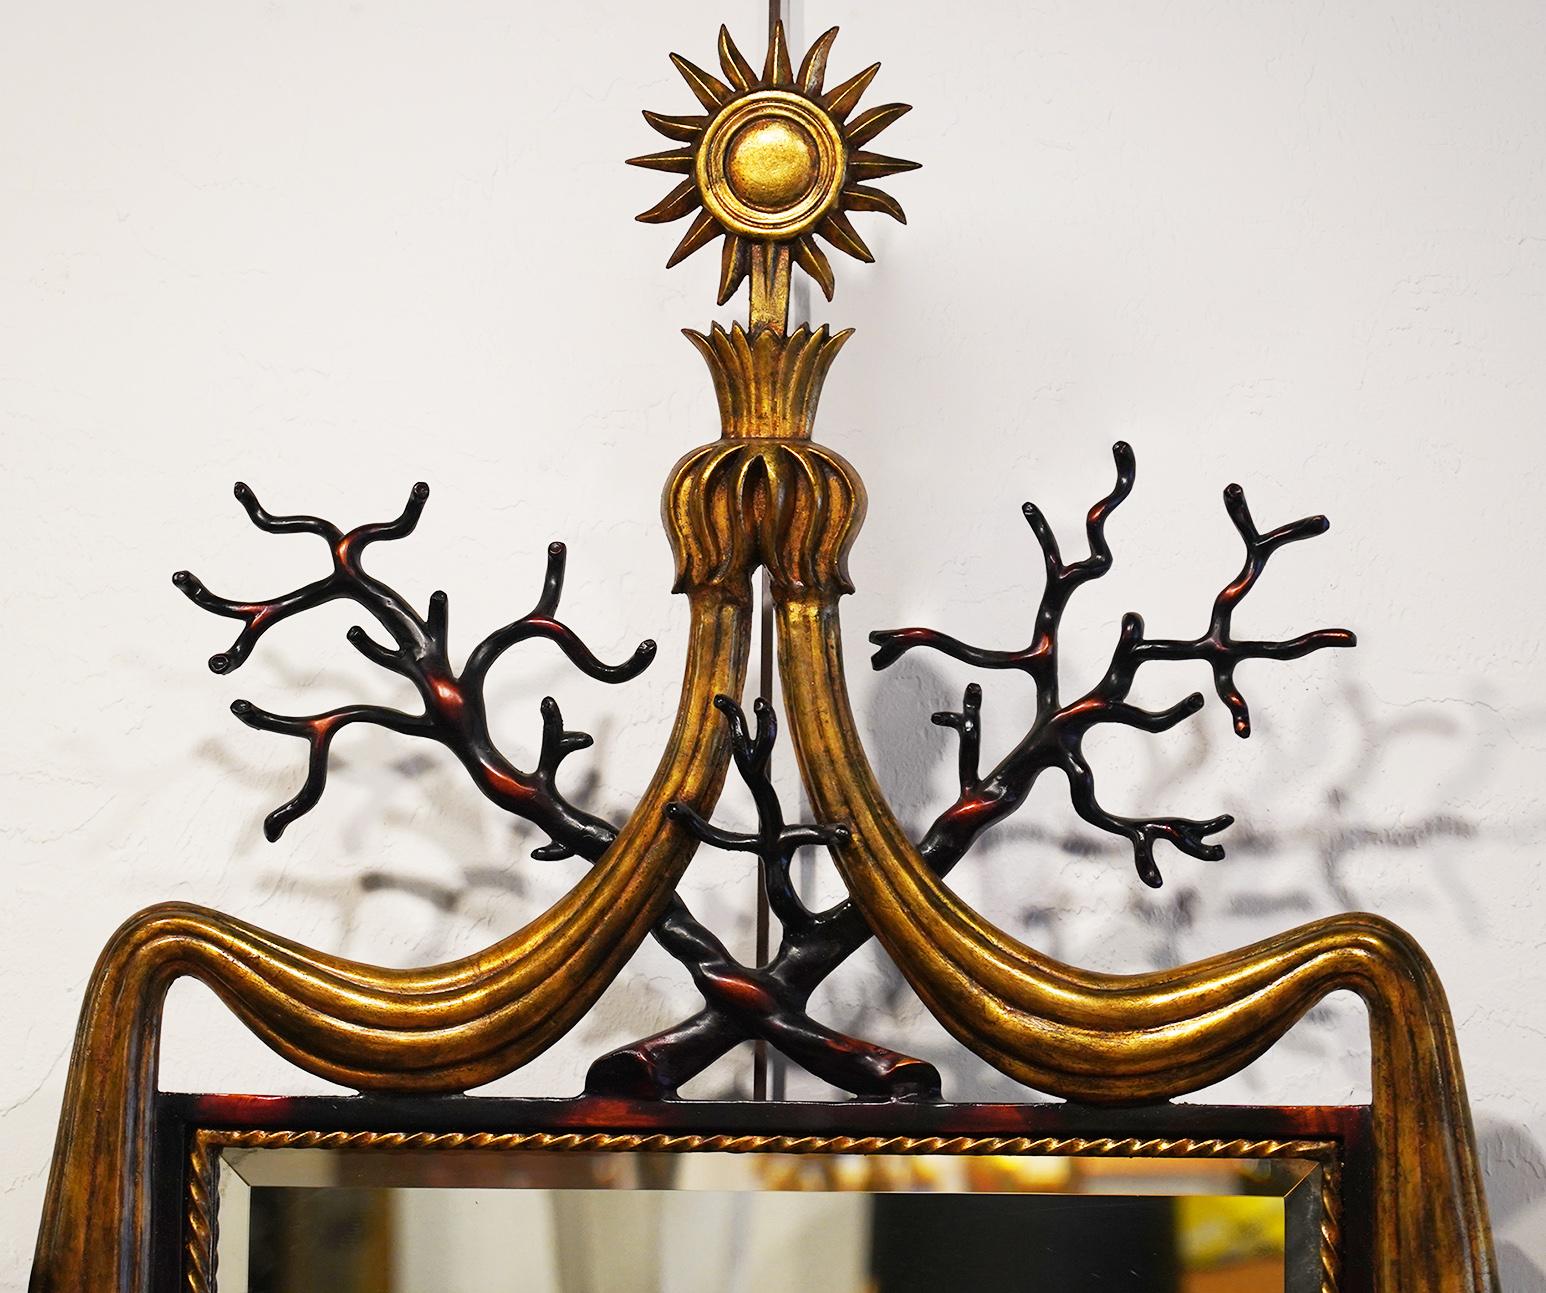 Iron mirror with painted decoration in the manner of Gilbert Poillerat. Gilt highlights with branch design and sunburst on top.